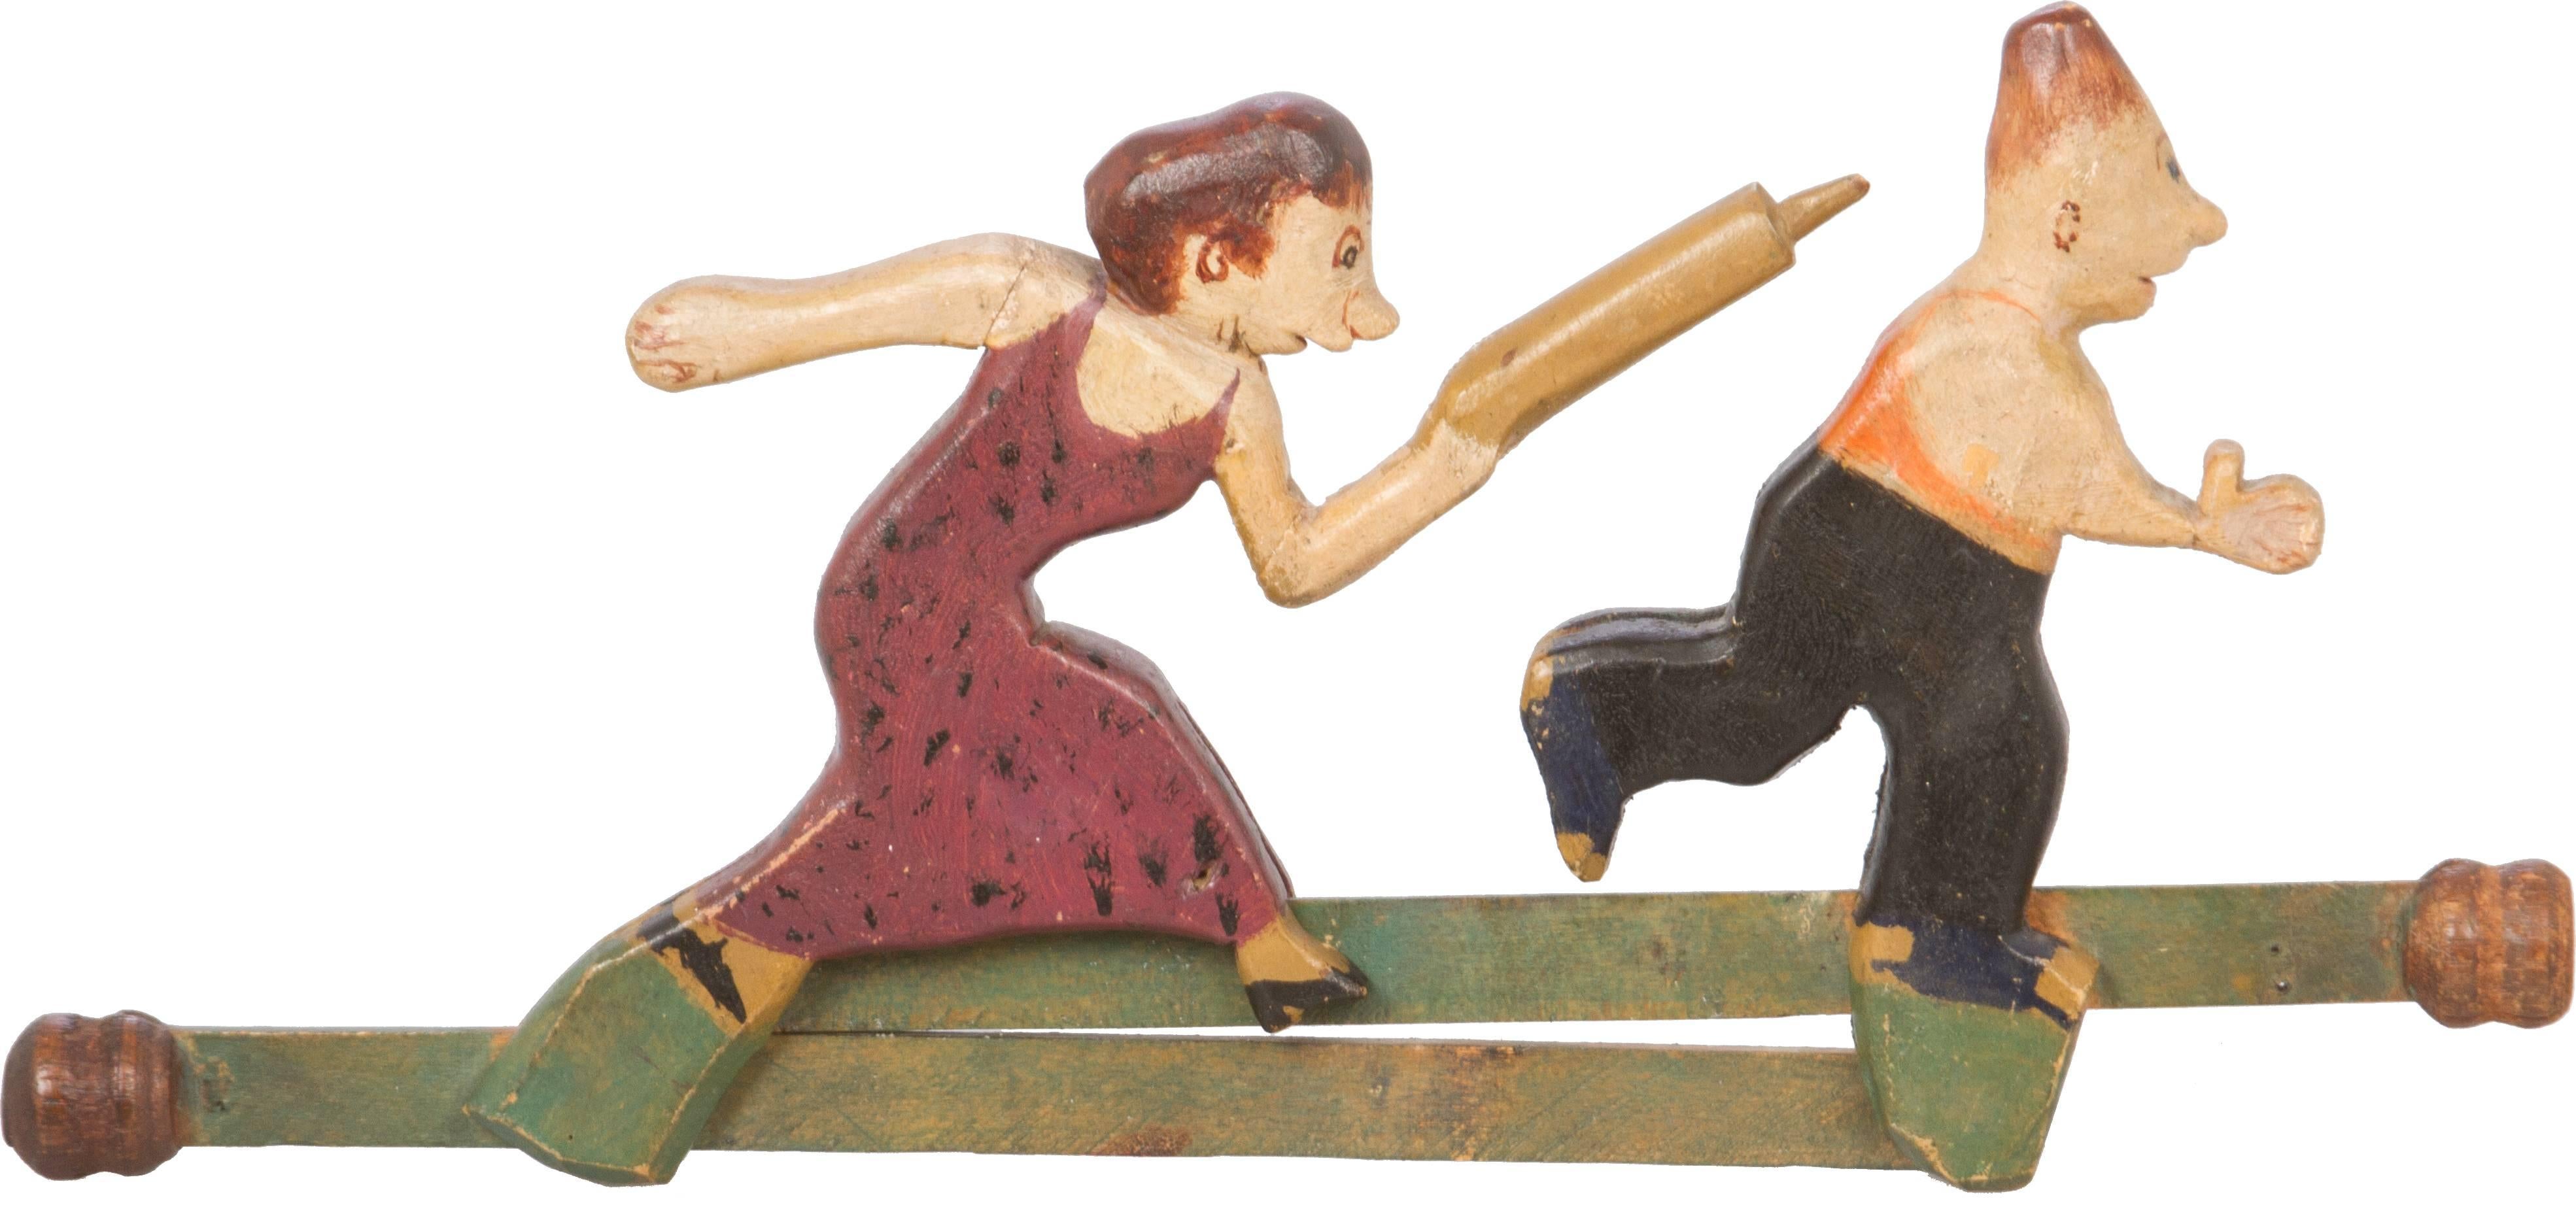 This is a one of a kind hand-carved toy of a wife, with rolling pin in hand, chasing her husband.